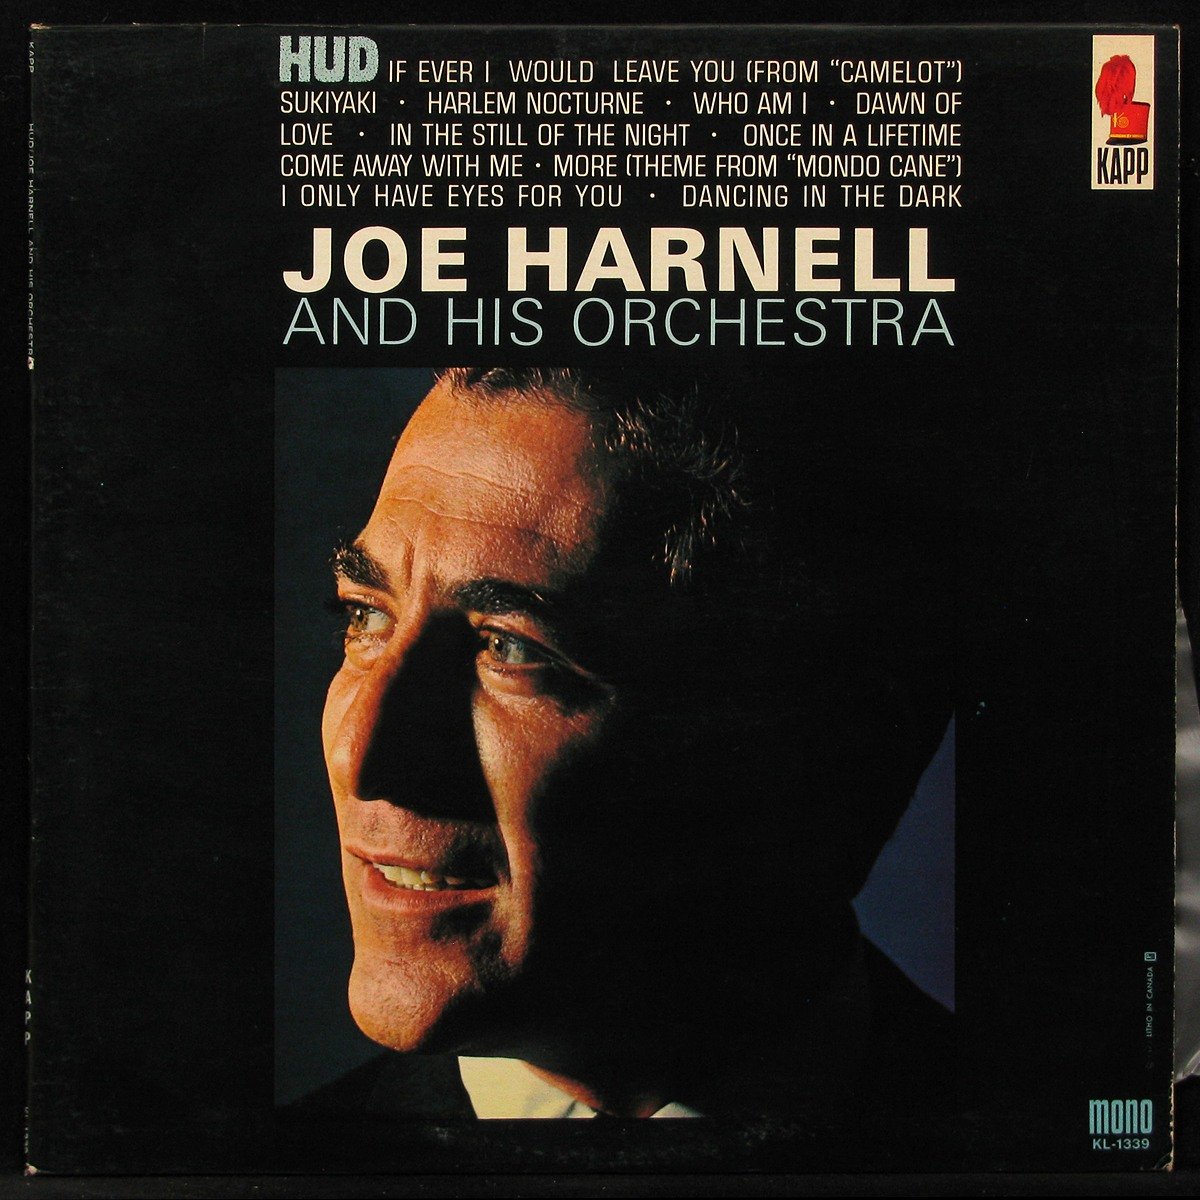 Joe Harnell & His Orchestra Play